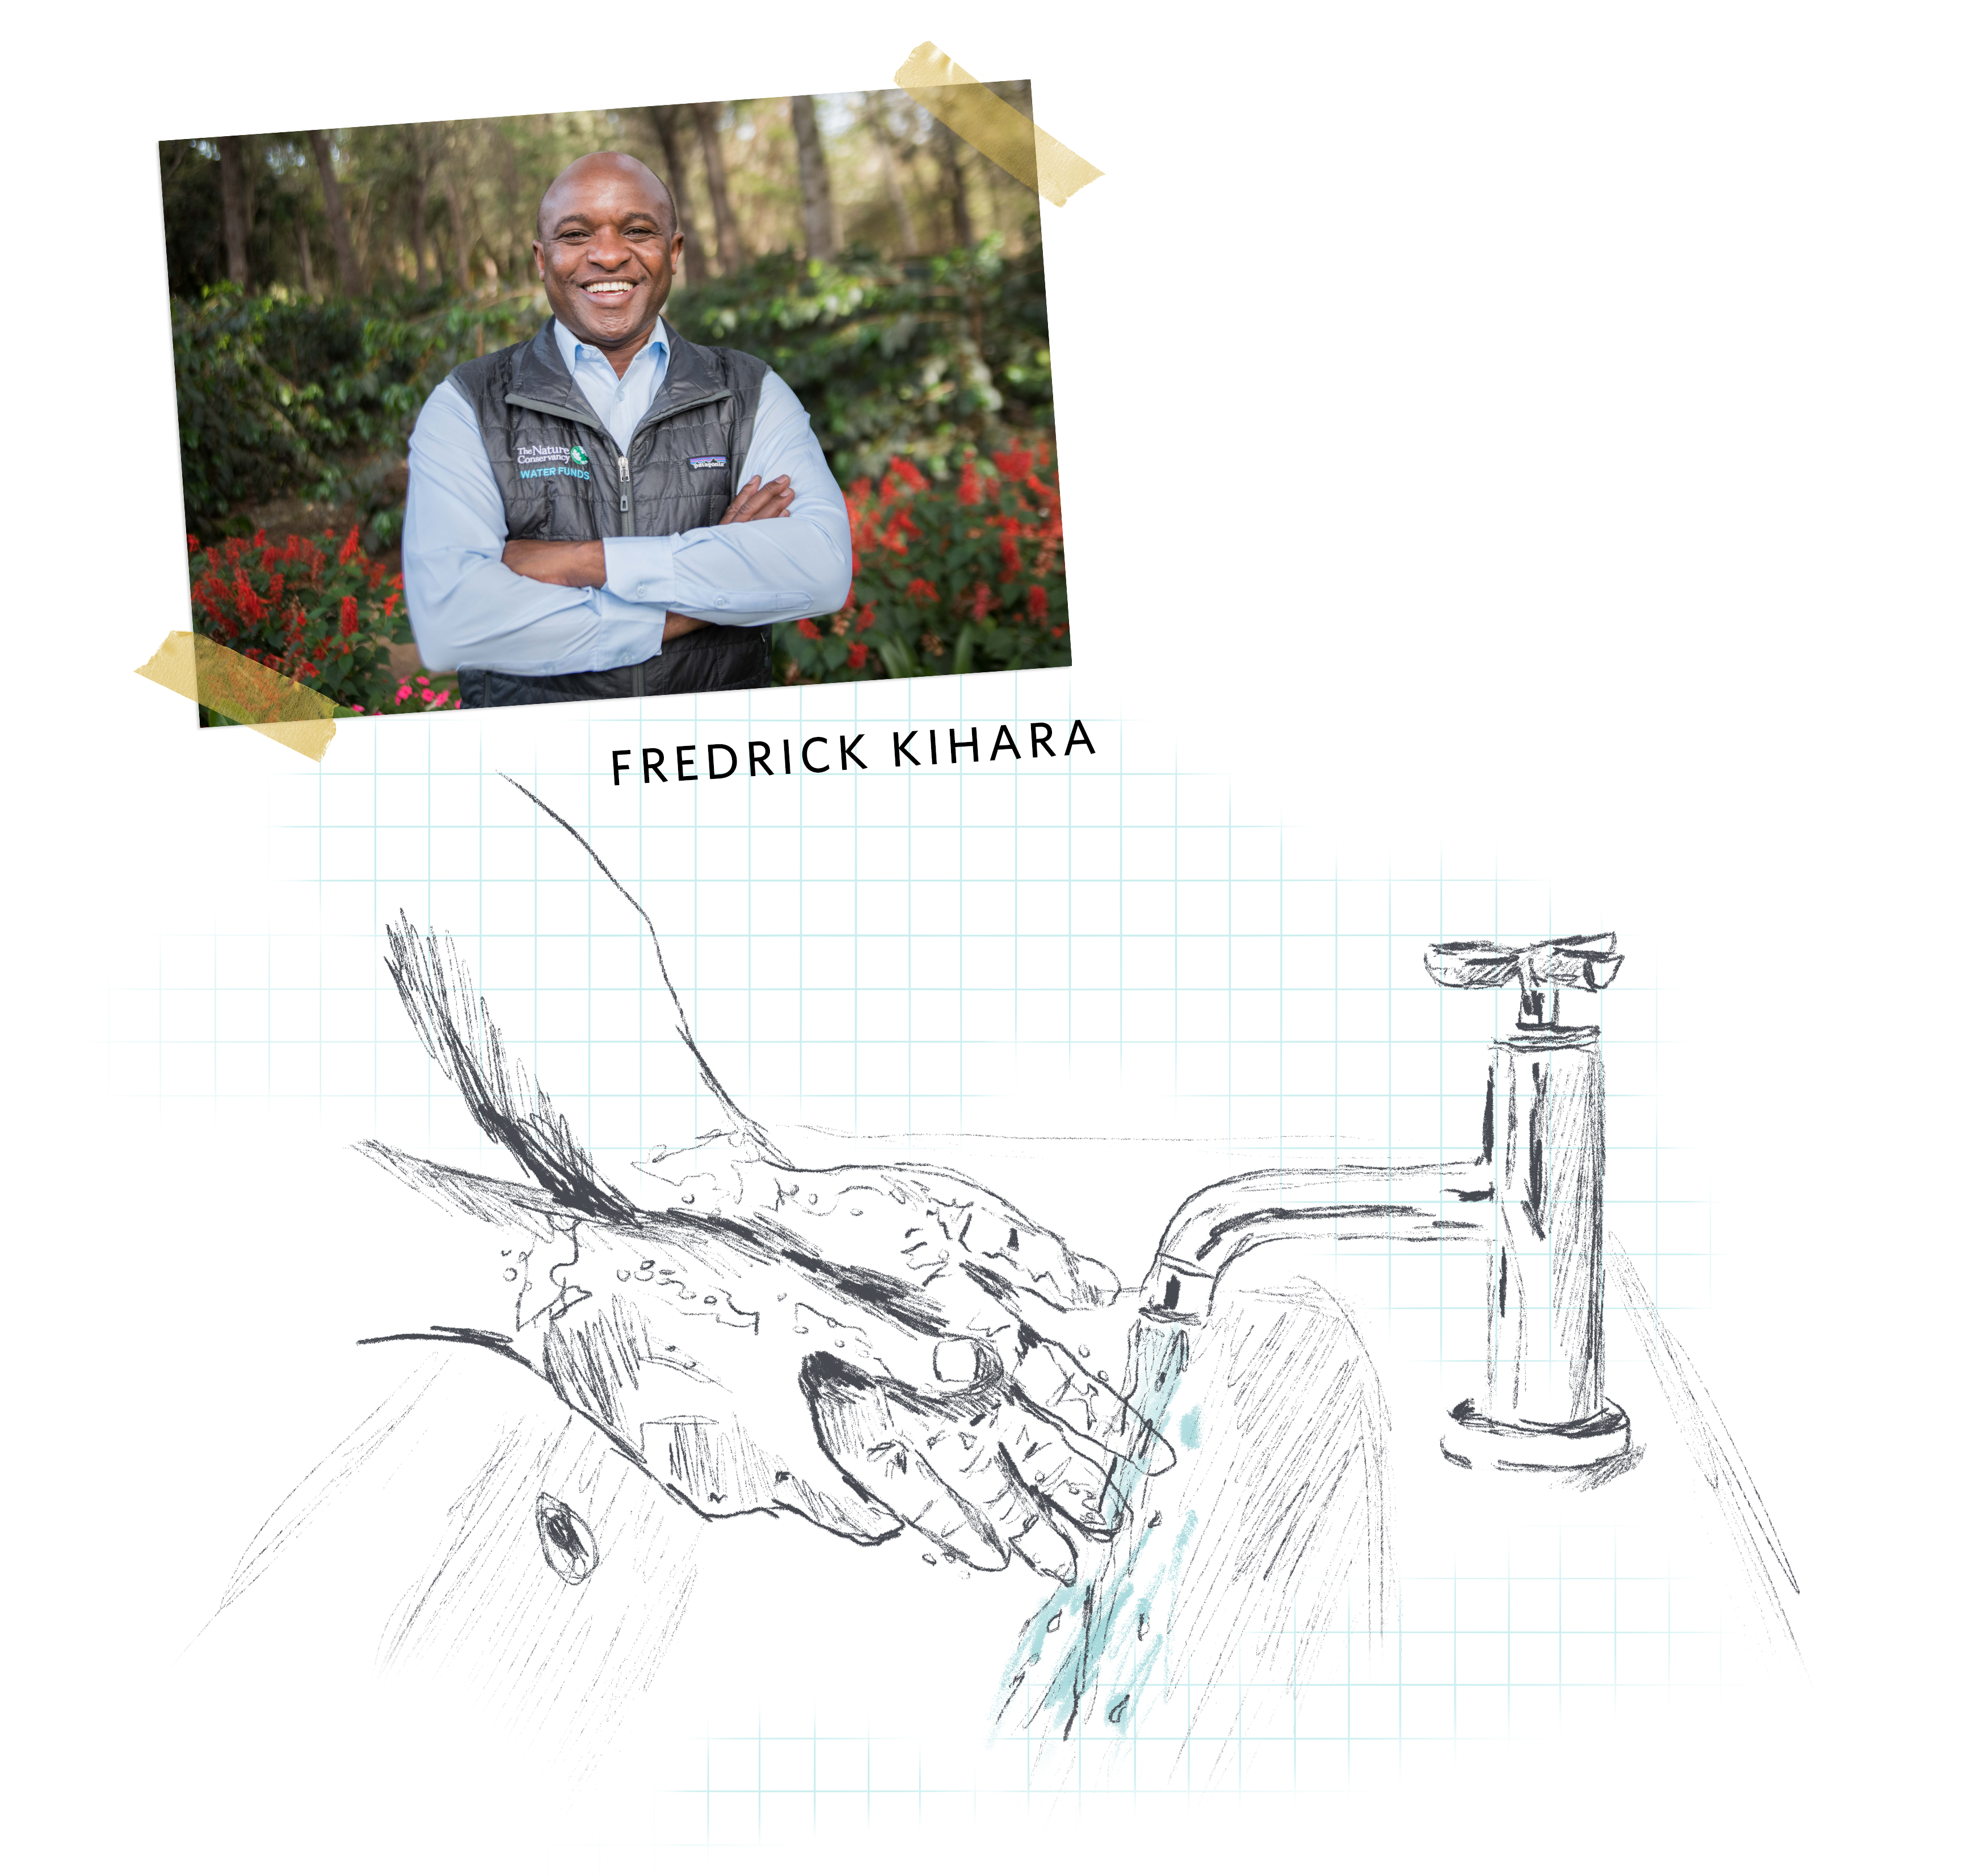 A photo of a smiling man with arms crossed in a garden, collaged with a sketchy illustration of hands being washed in a sink with running water.